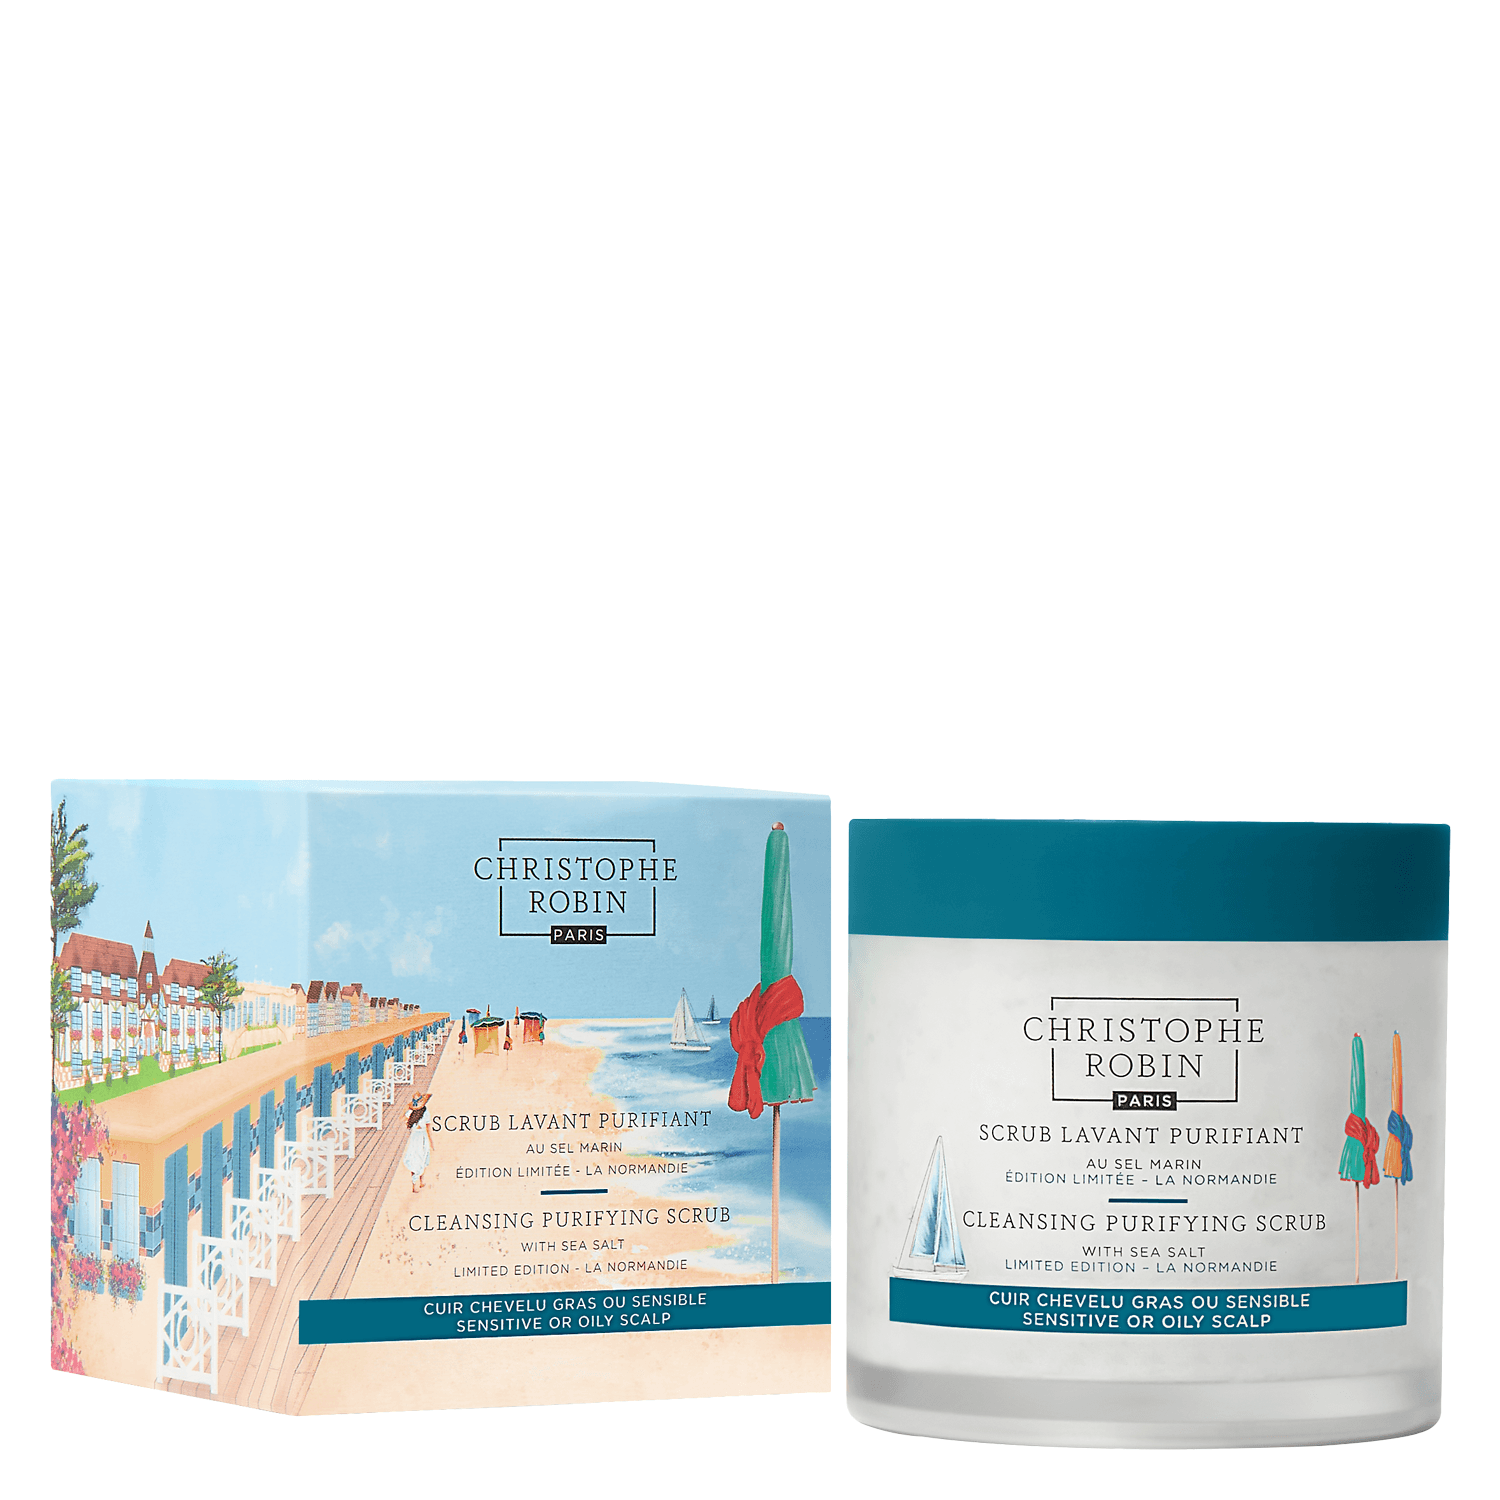 Christophe Robin - Cleansing Purifying Scrub with Sea Salt Limited Edition